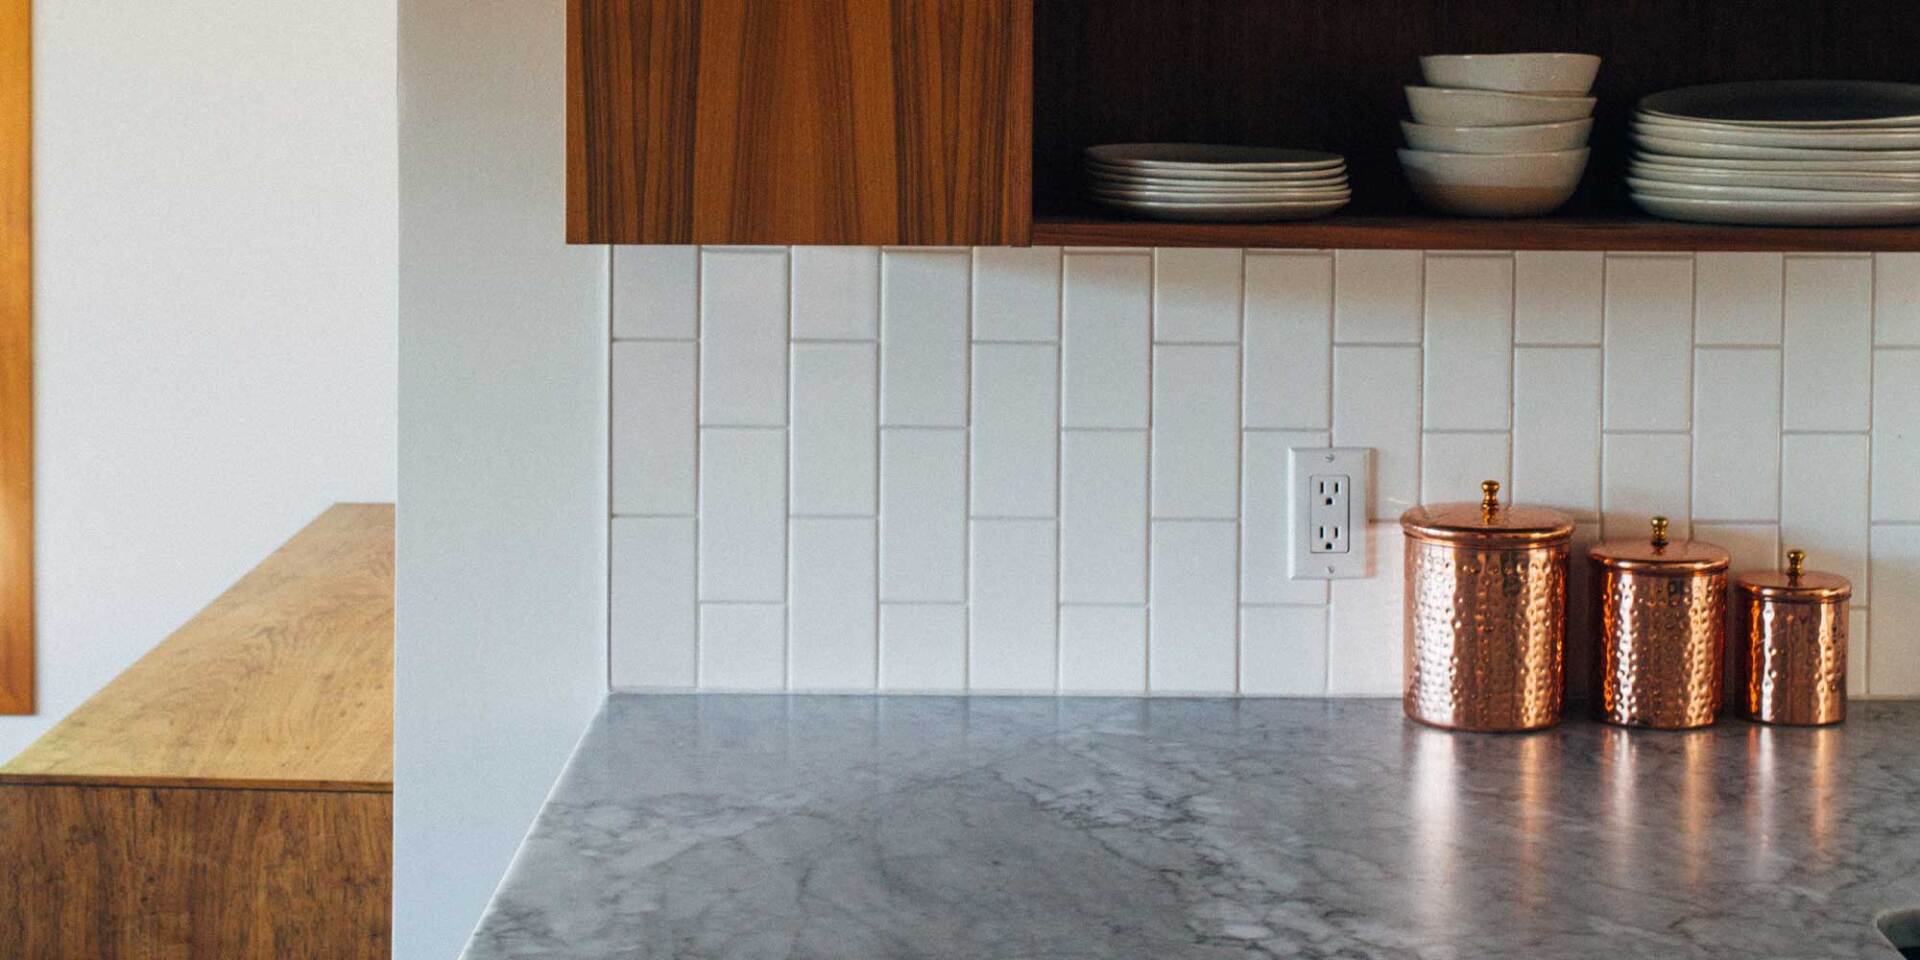 Laying traditional subway tile in a vertical aspect creates a more alternative look.